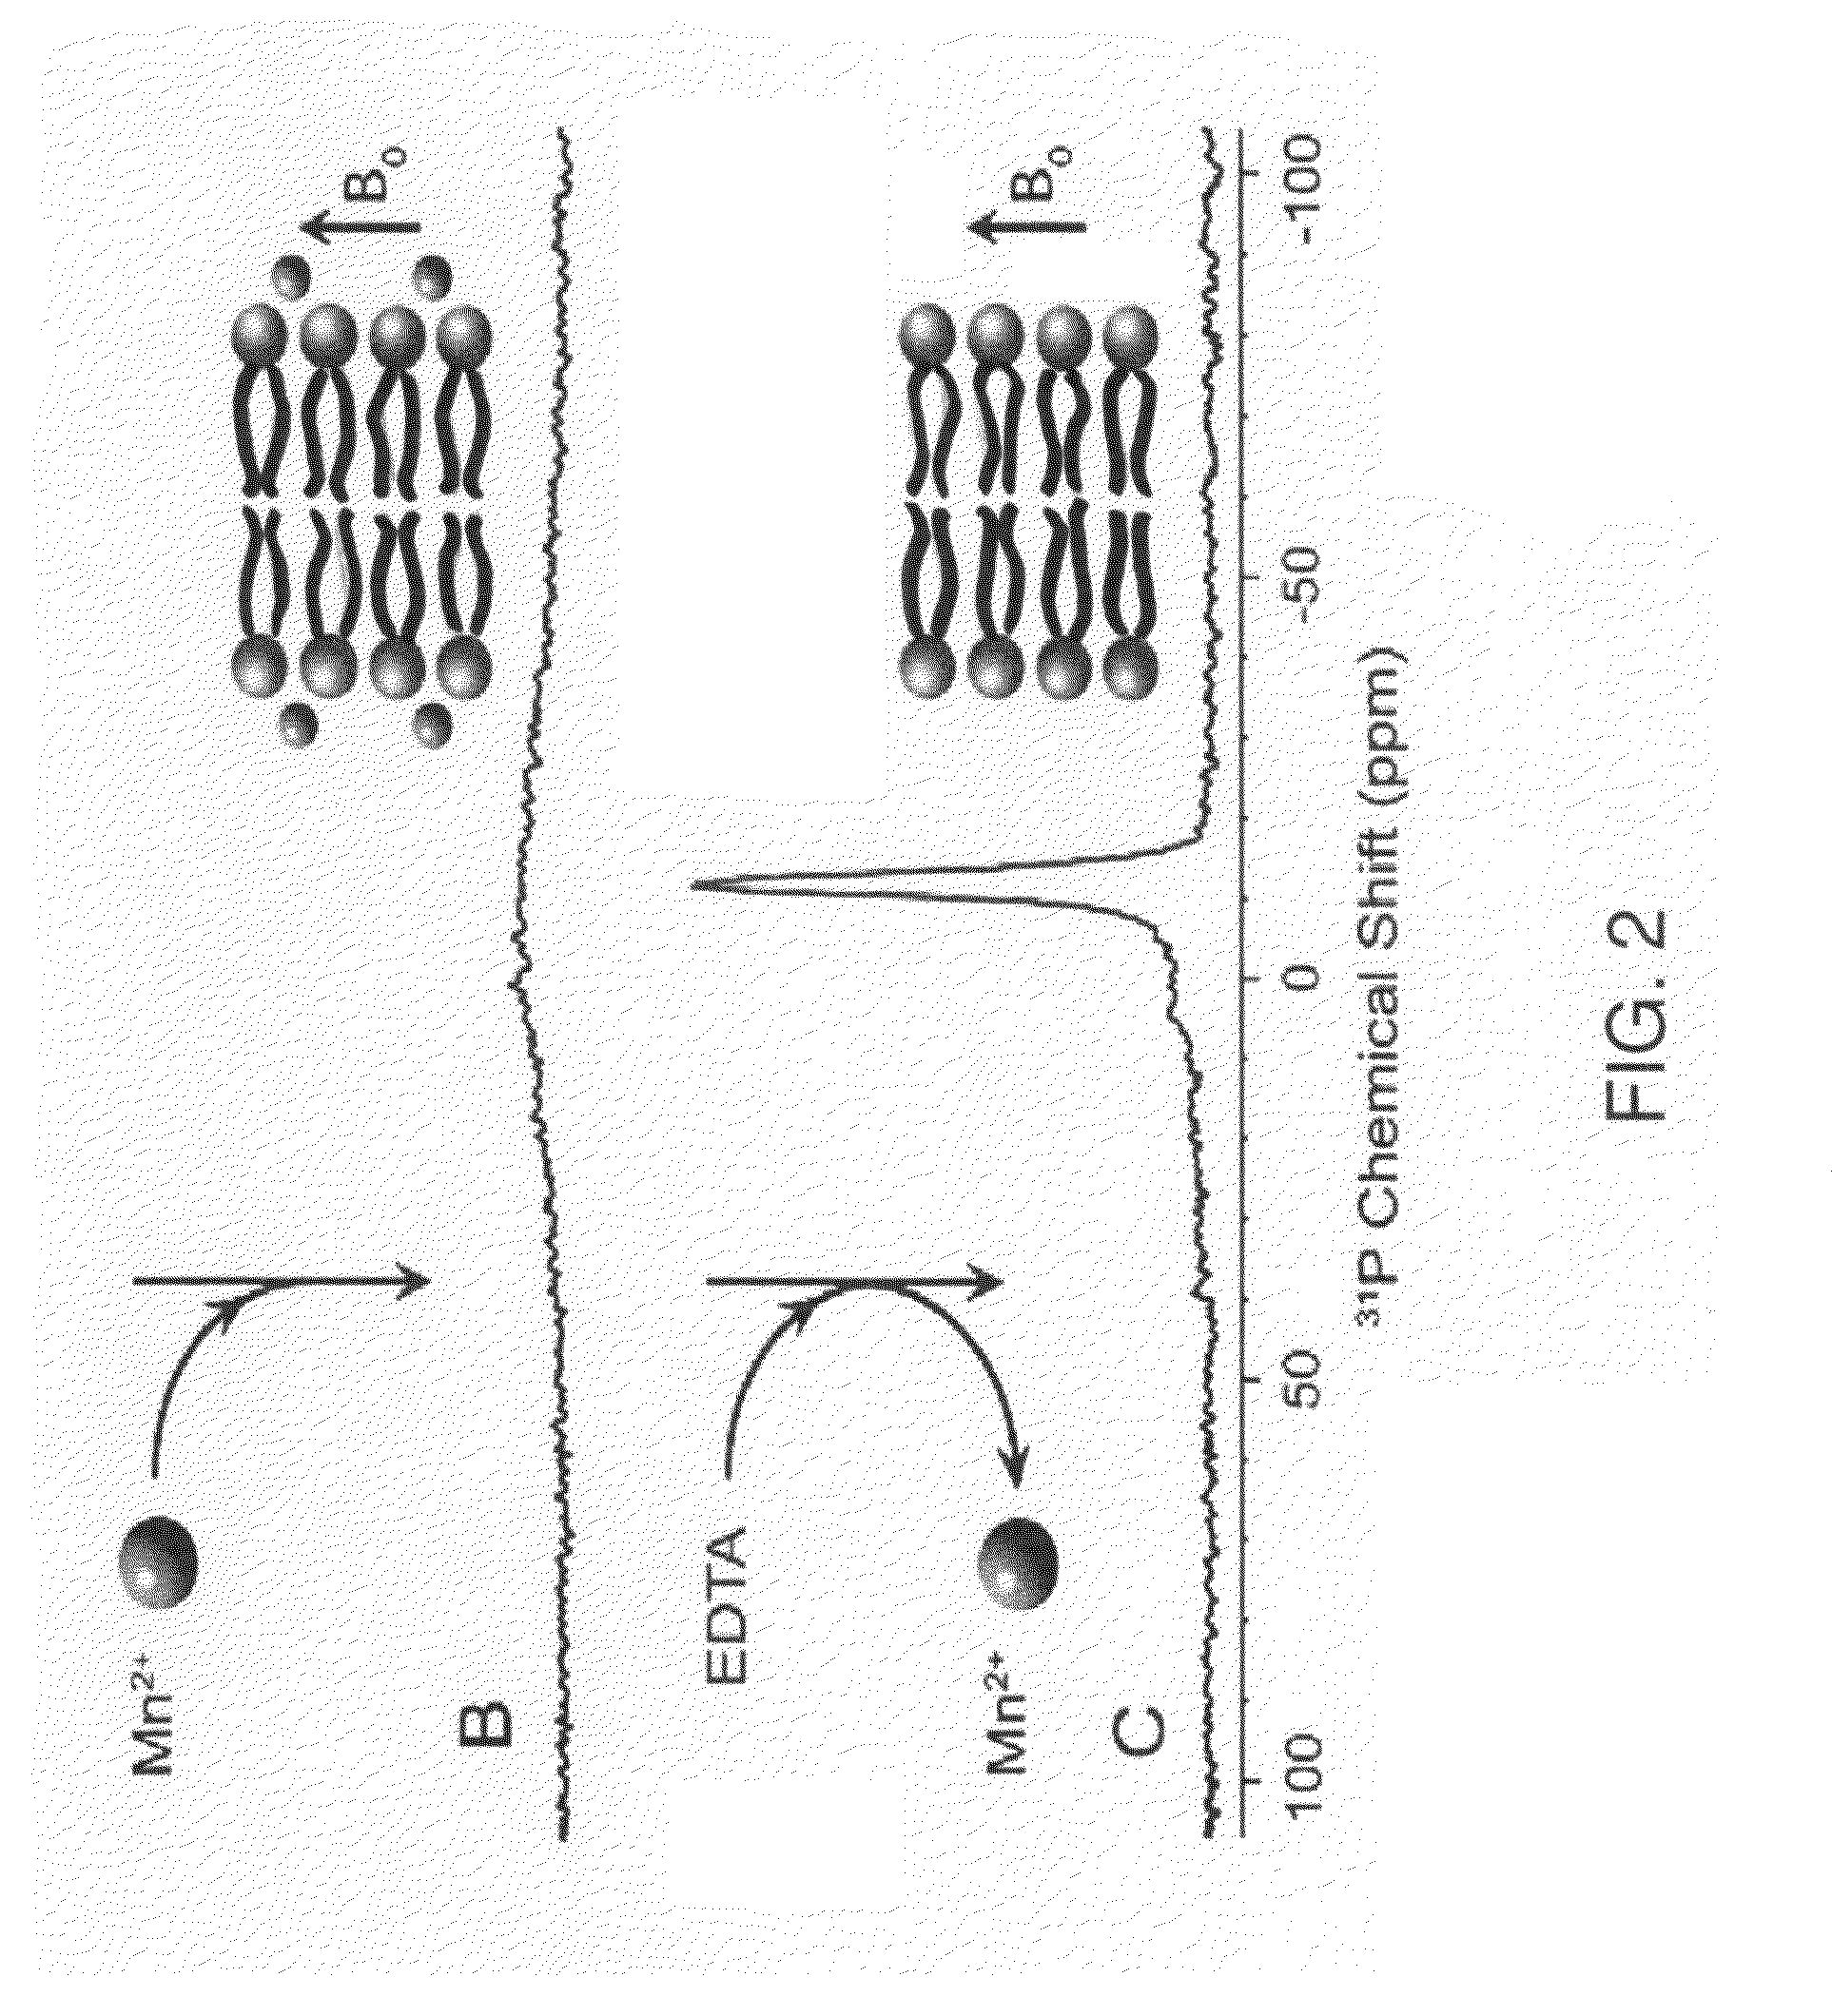 Solid-state NMR method for screening cell membrane protein binding drug candidates